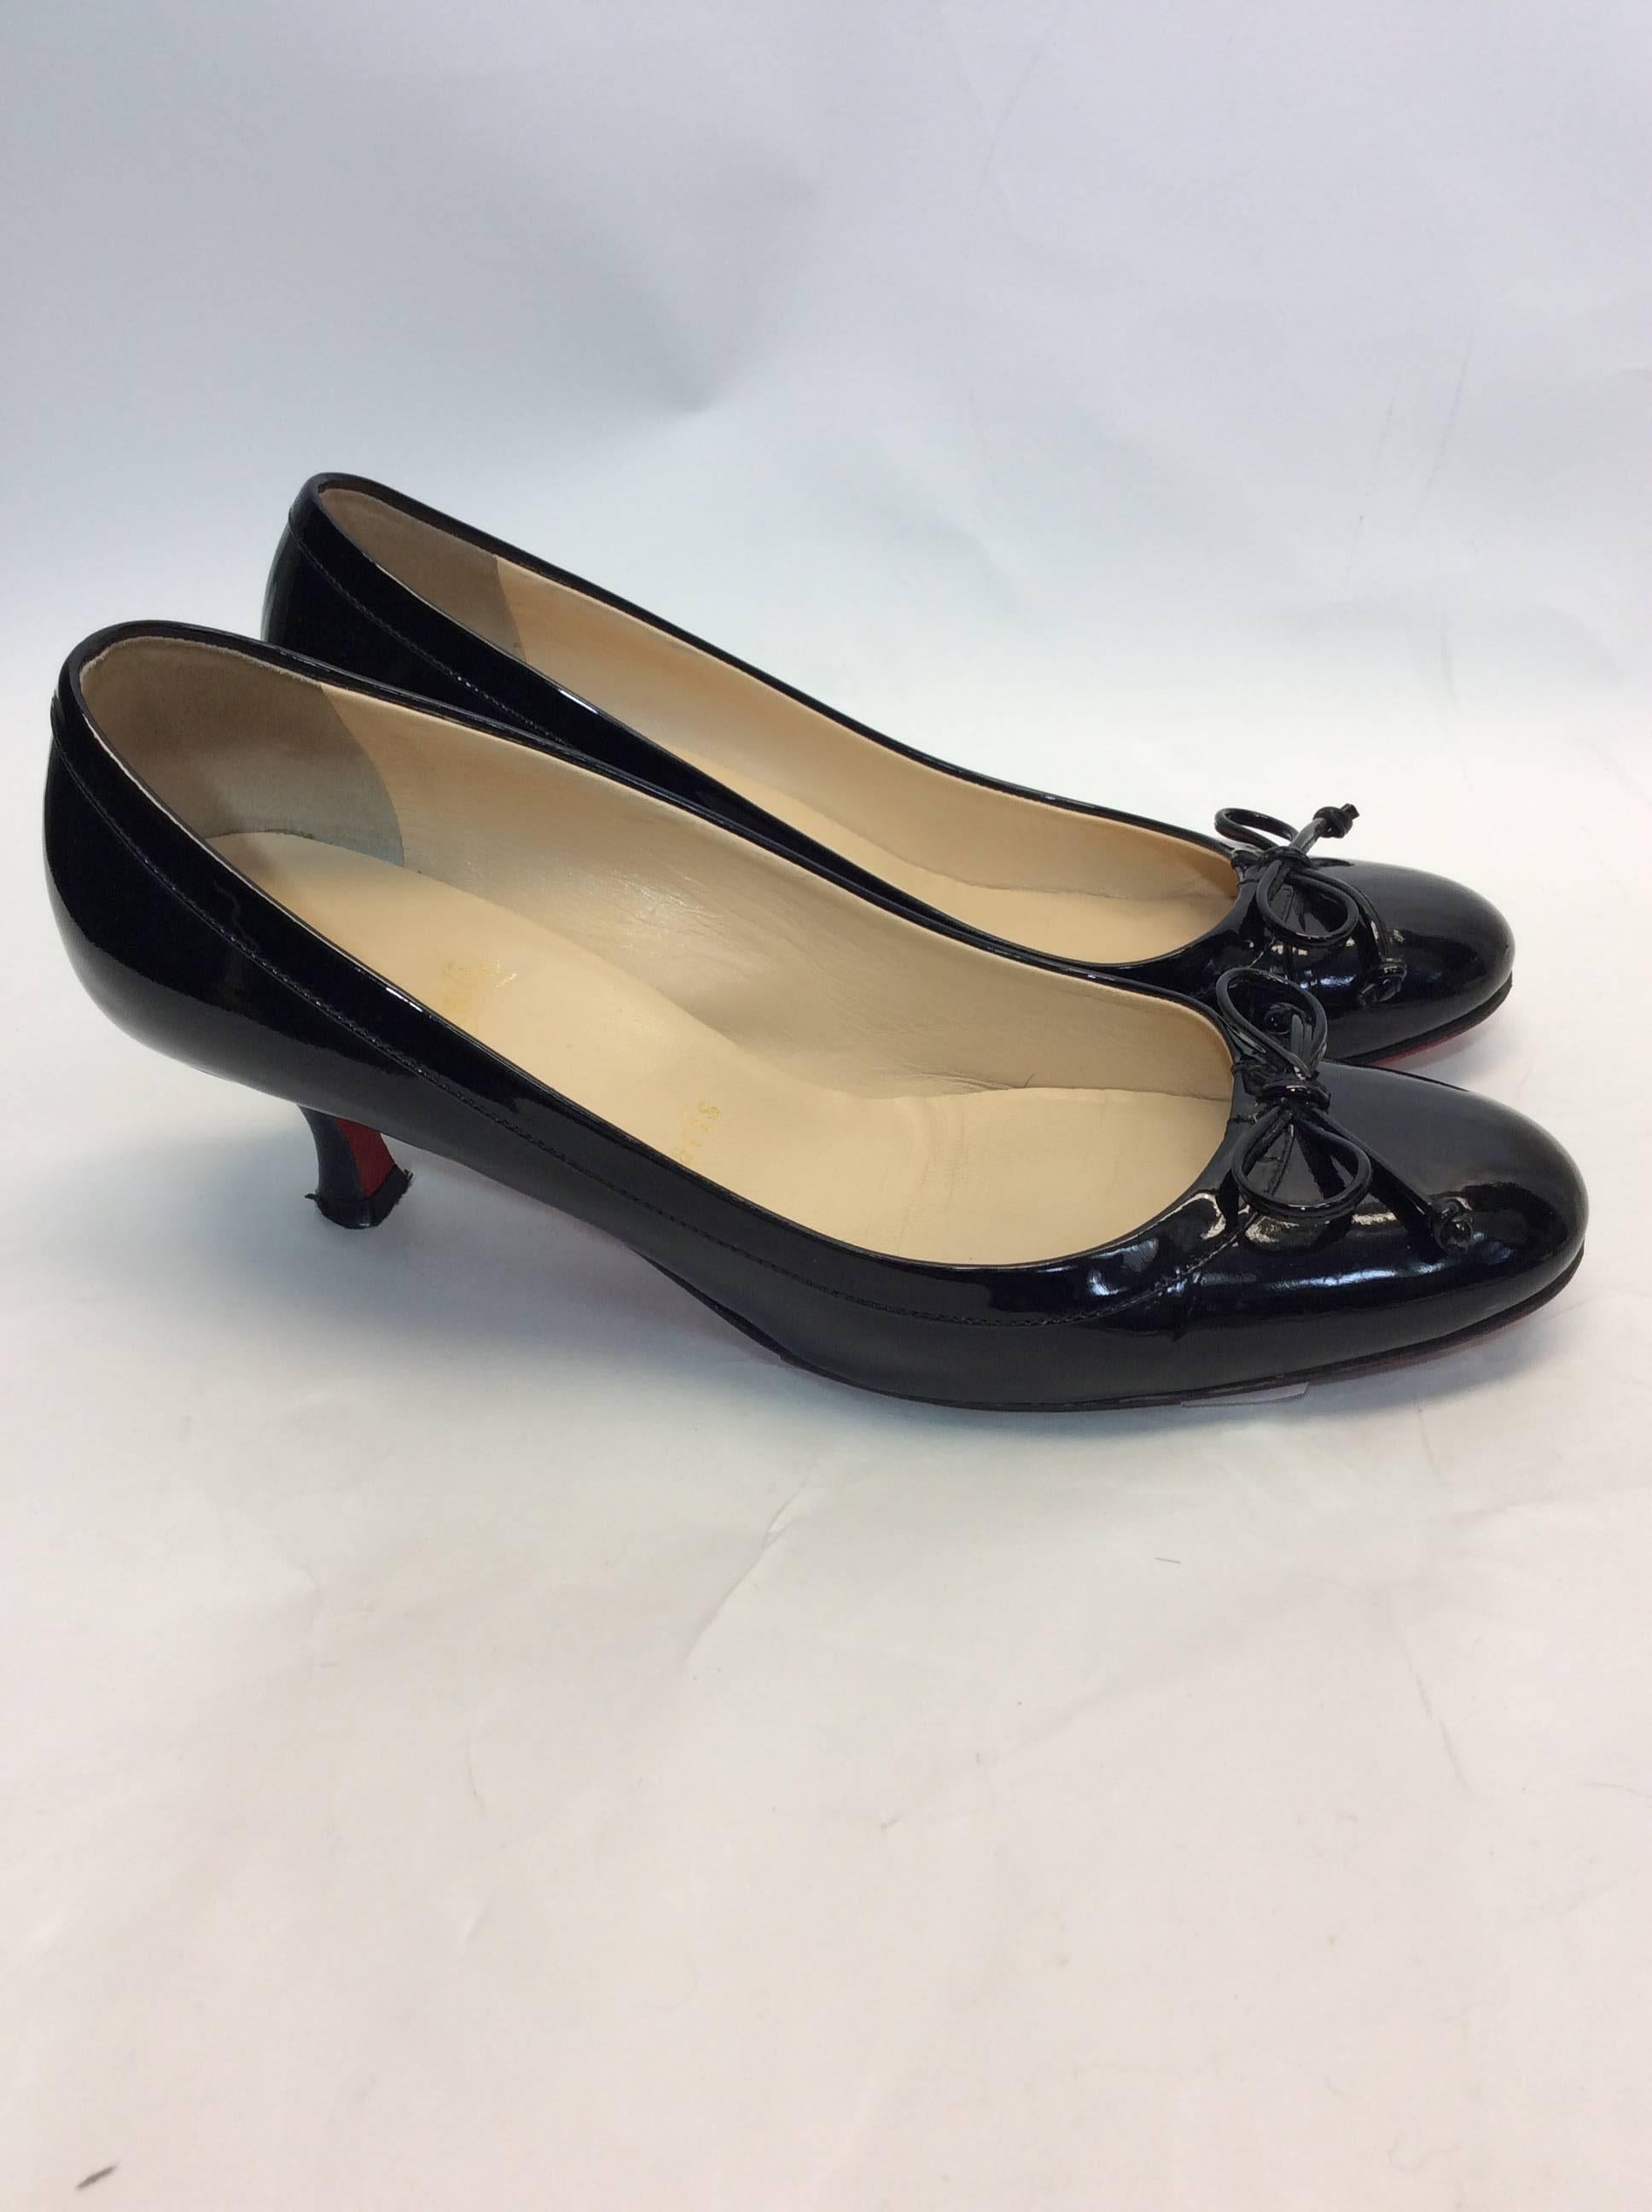 Christian Louboutin Patent Leather Kitten Heels In Excellent Condition In Narberth, PA